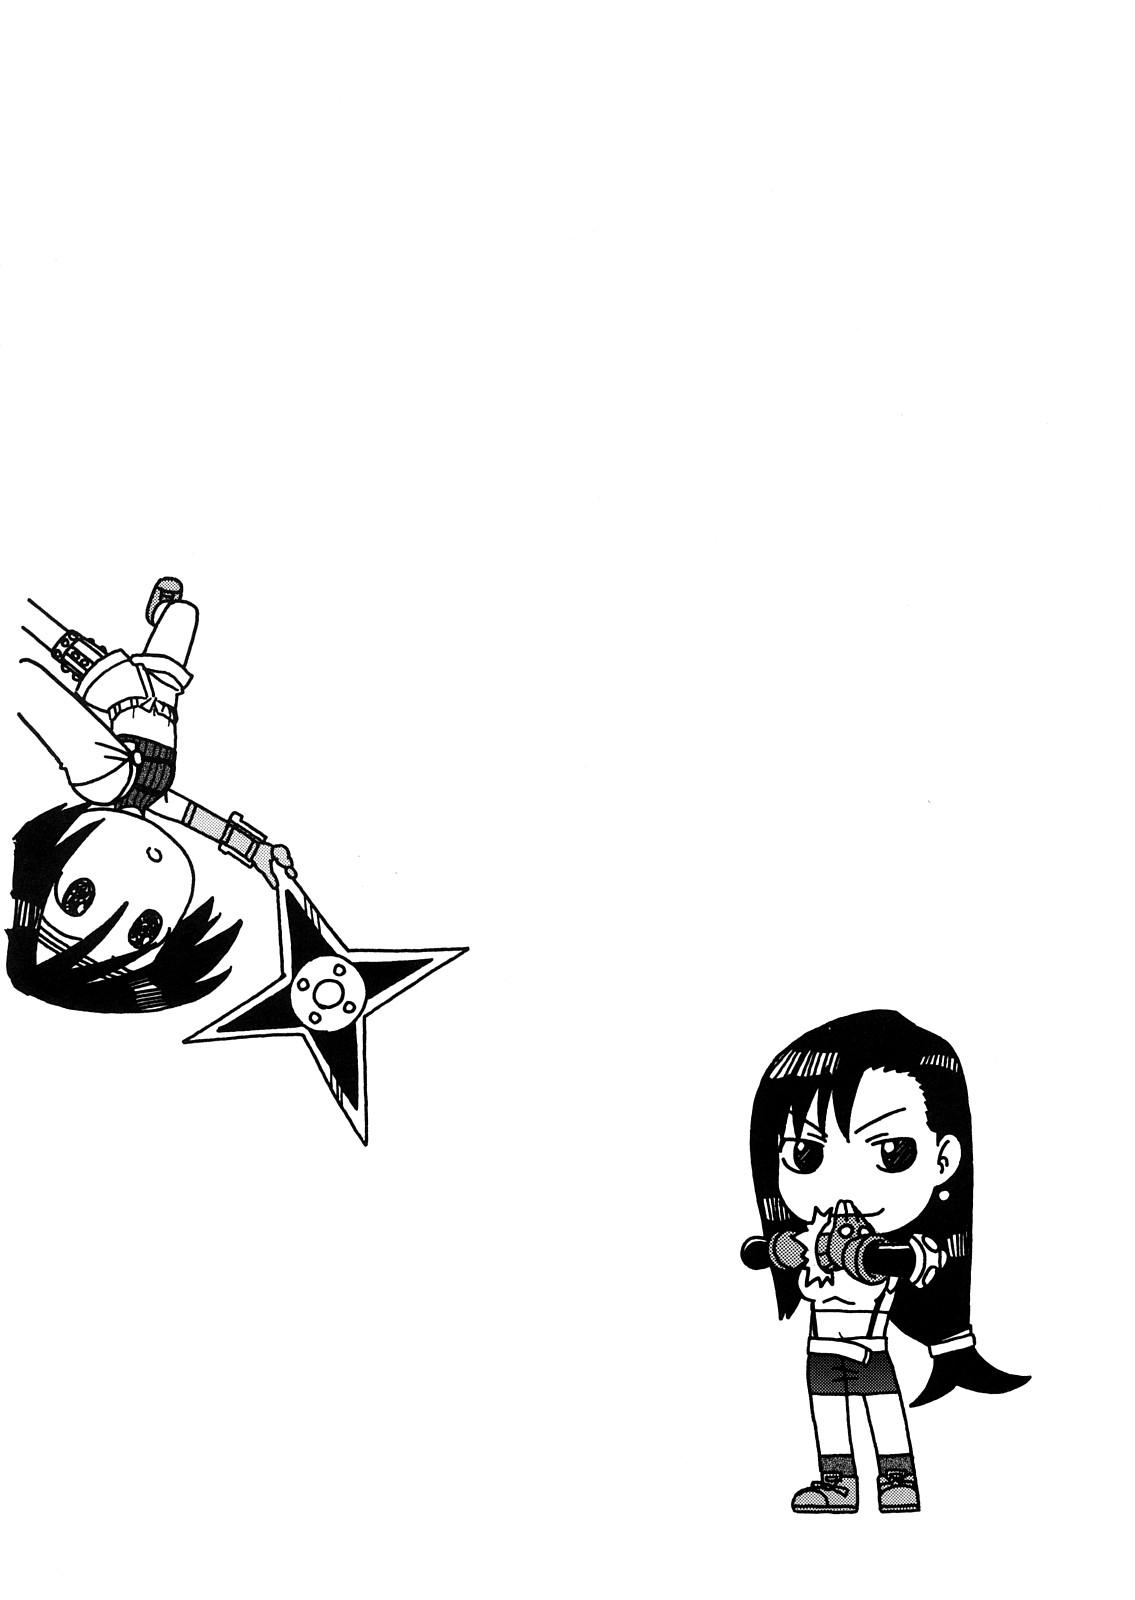 Tifa to Yuffie to Yojouhan 2